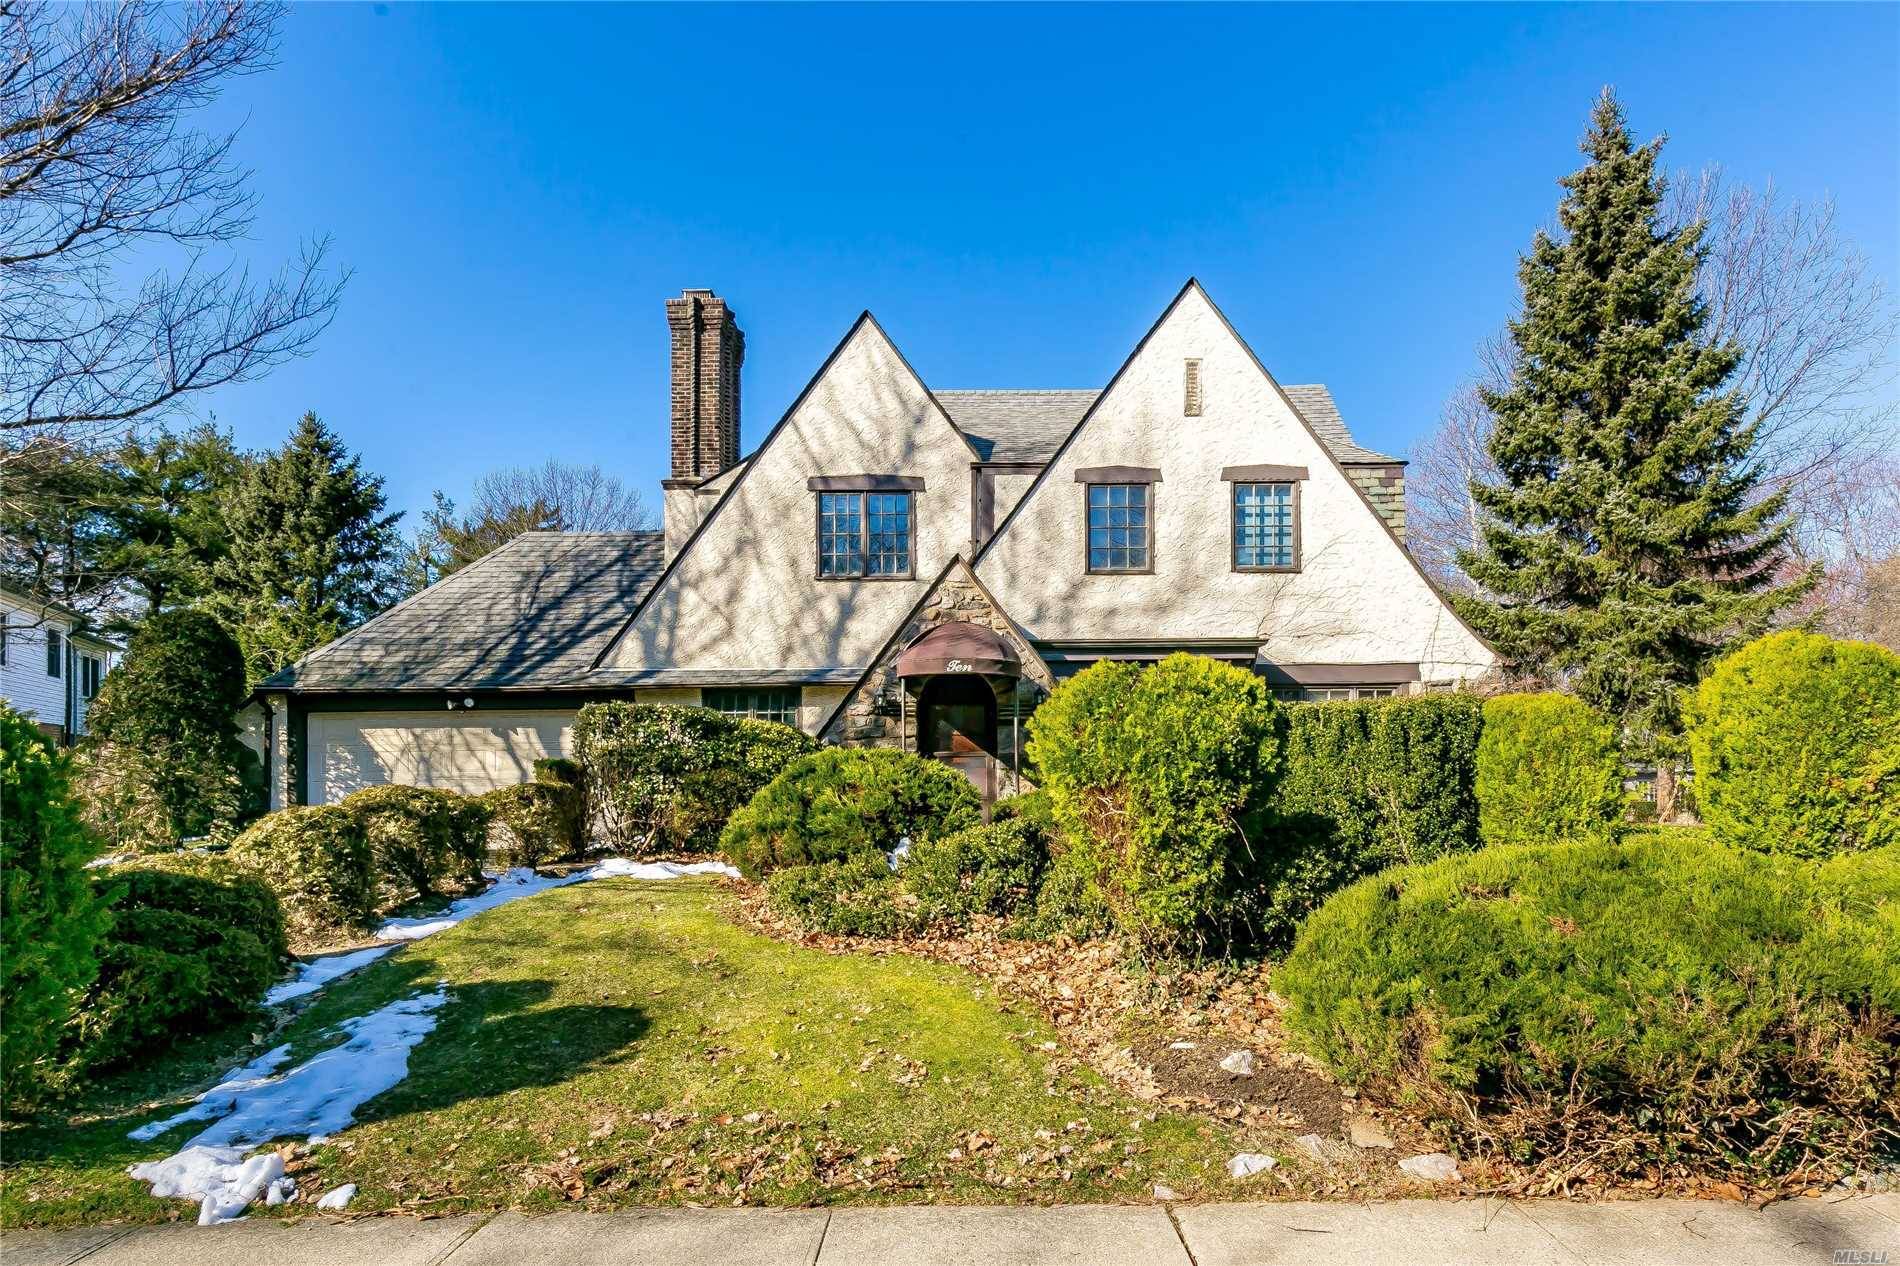 Russell Gardens Elegant Tudor Home With 5 Bedrooms And 3 Full Baths.